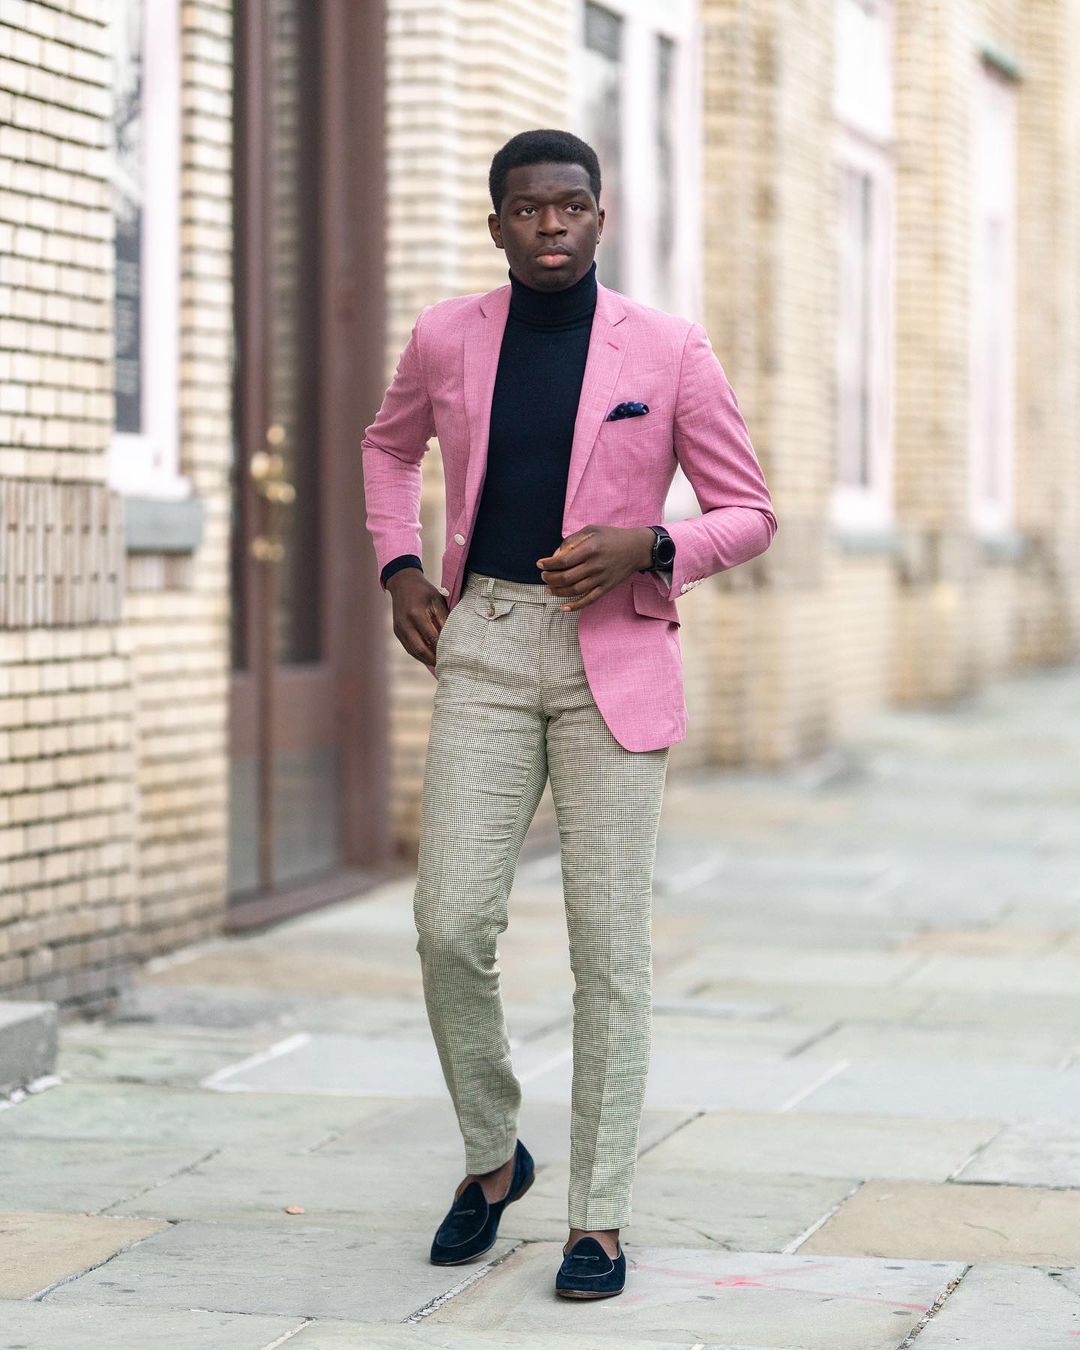 The White Pants Outfit for Men: How to Nail the Look